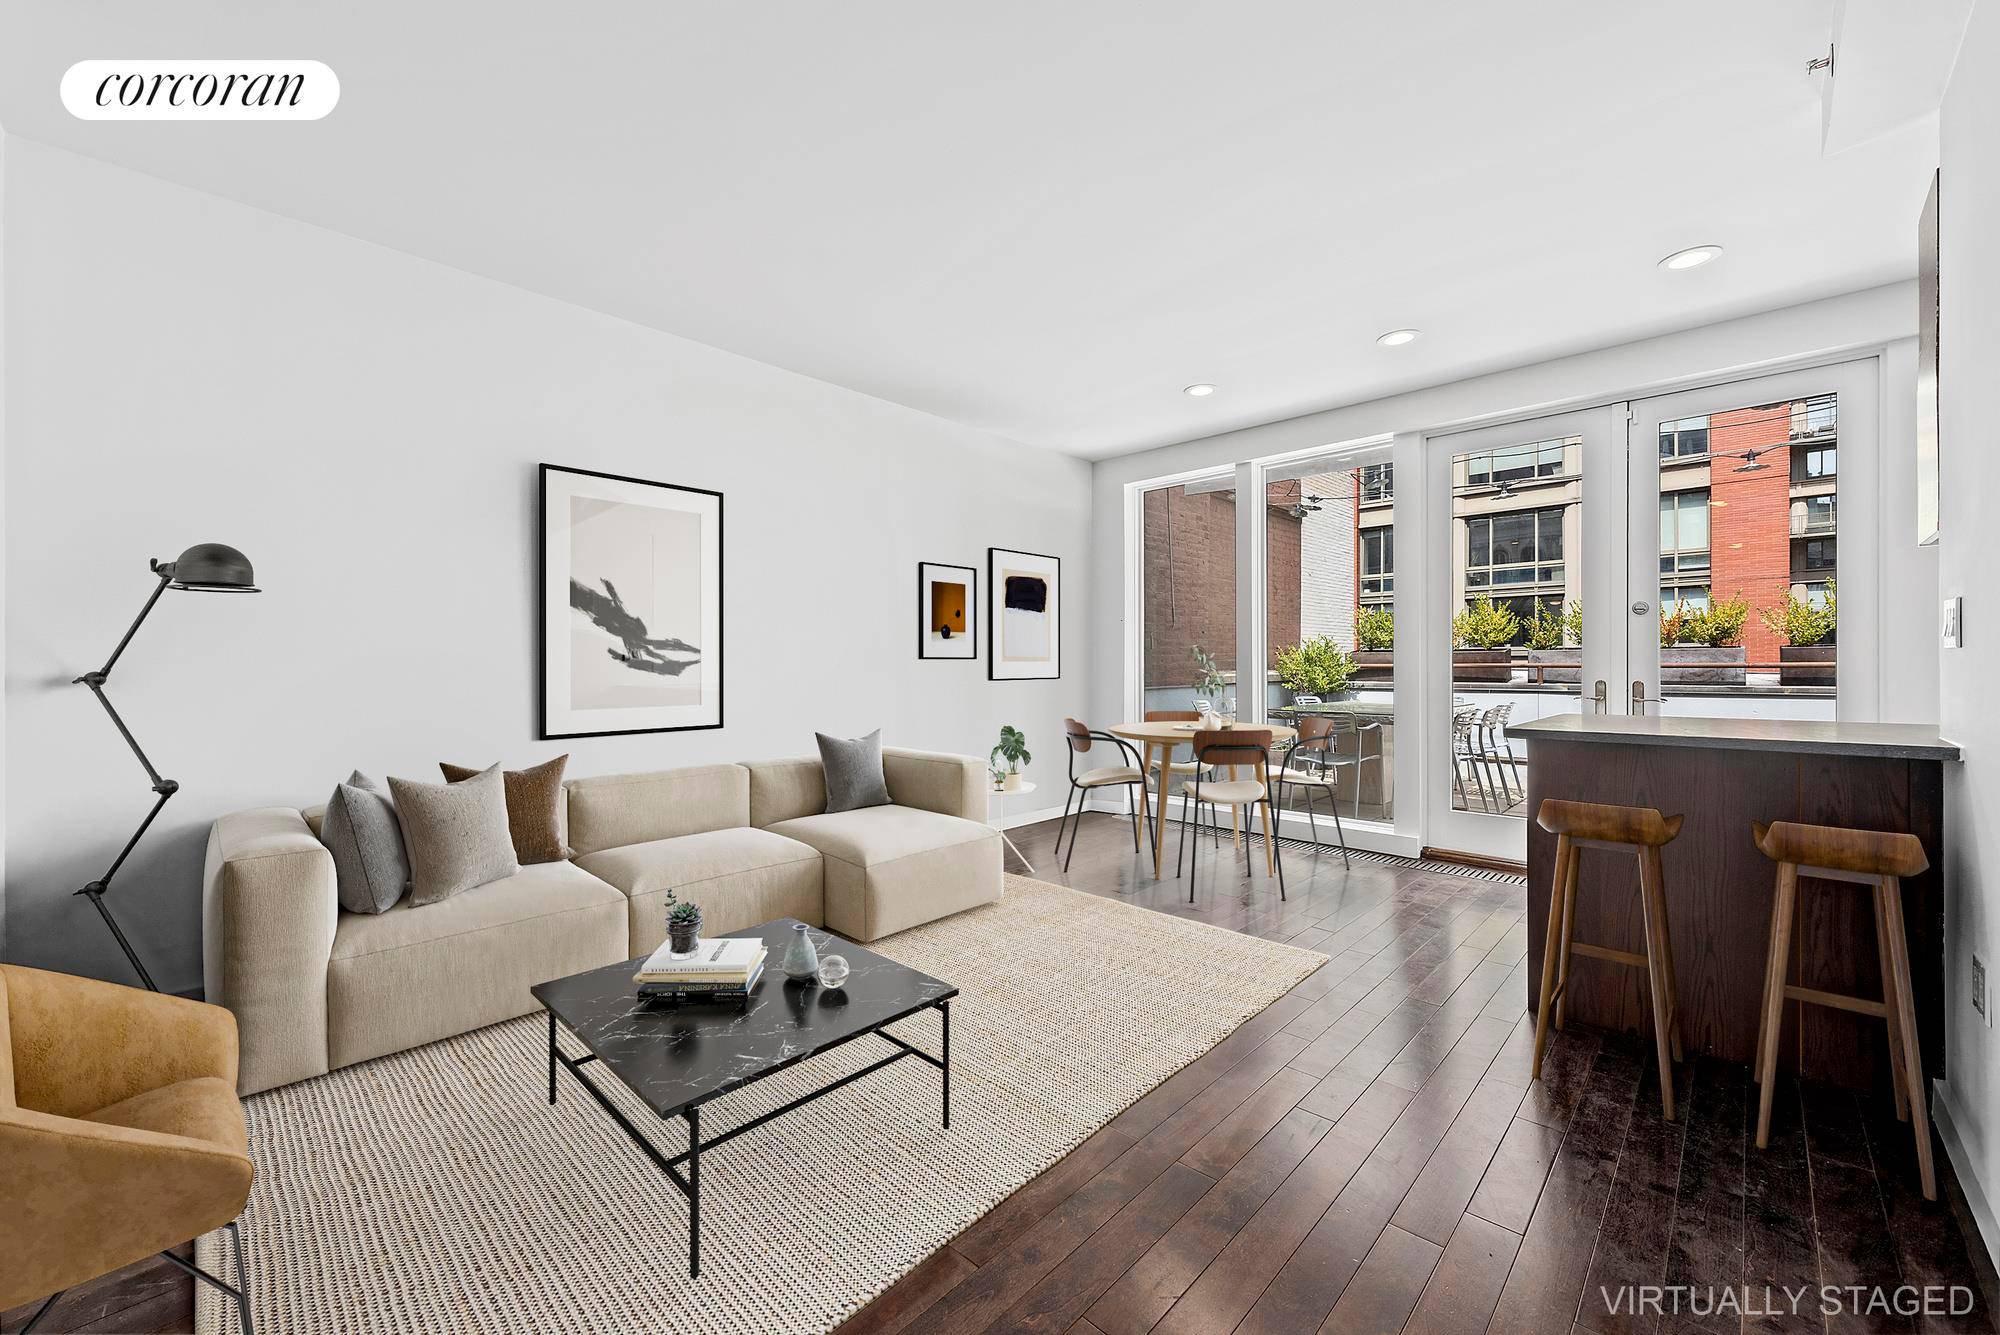 Investor Friendly Purchase Tenant in place until August 2023 Glamorous penthouse living awaits in this stunning two bedroom, two bathroom duplex with two oversized terraces in a renovated brownstone condominium.